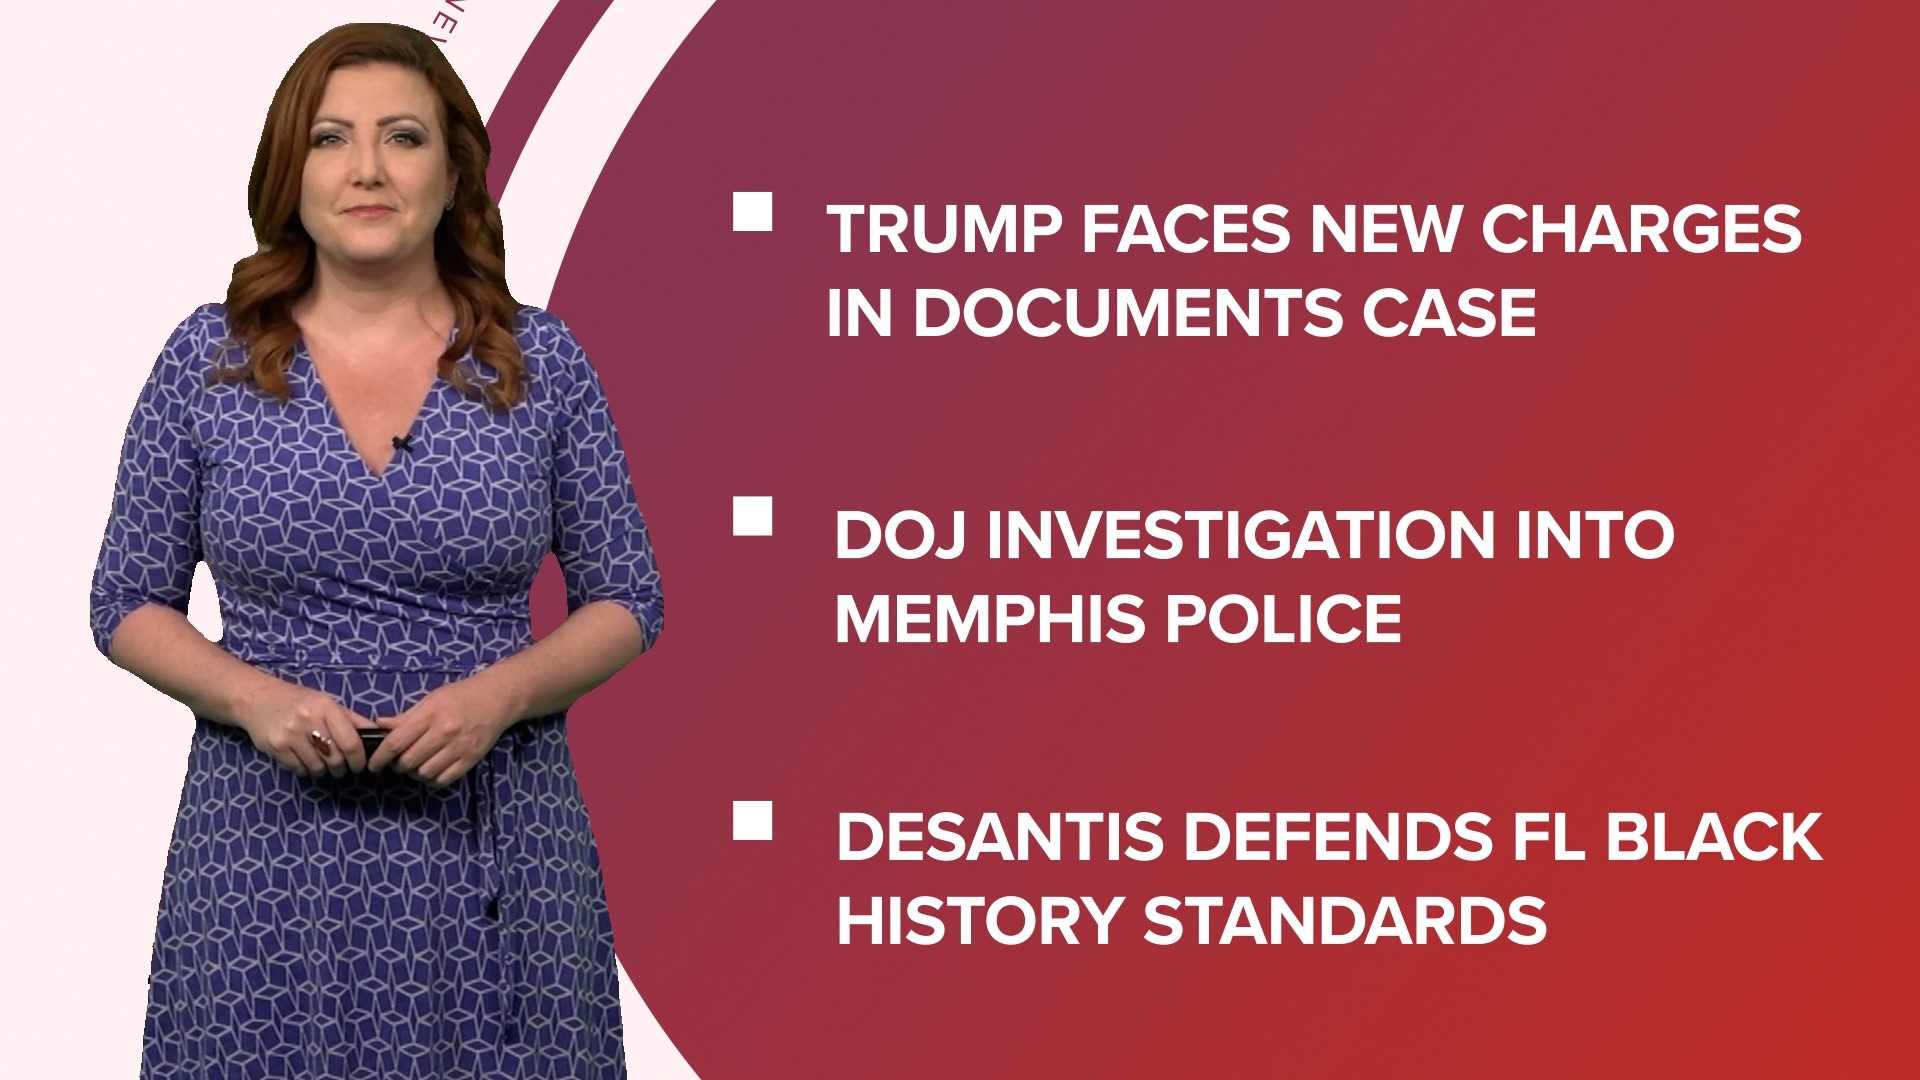 A look at what is happening in the news from Donald Trump facing more charges to controversy over Florida's new black history standards and Emmys postponed.